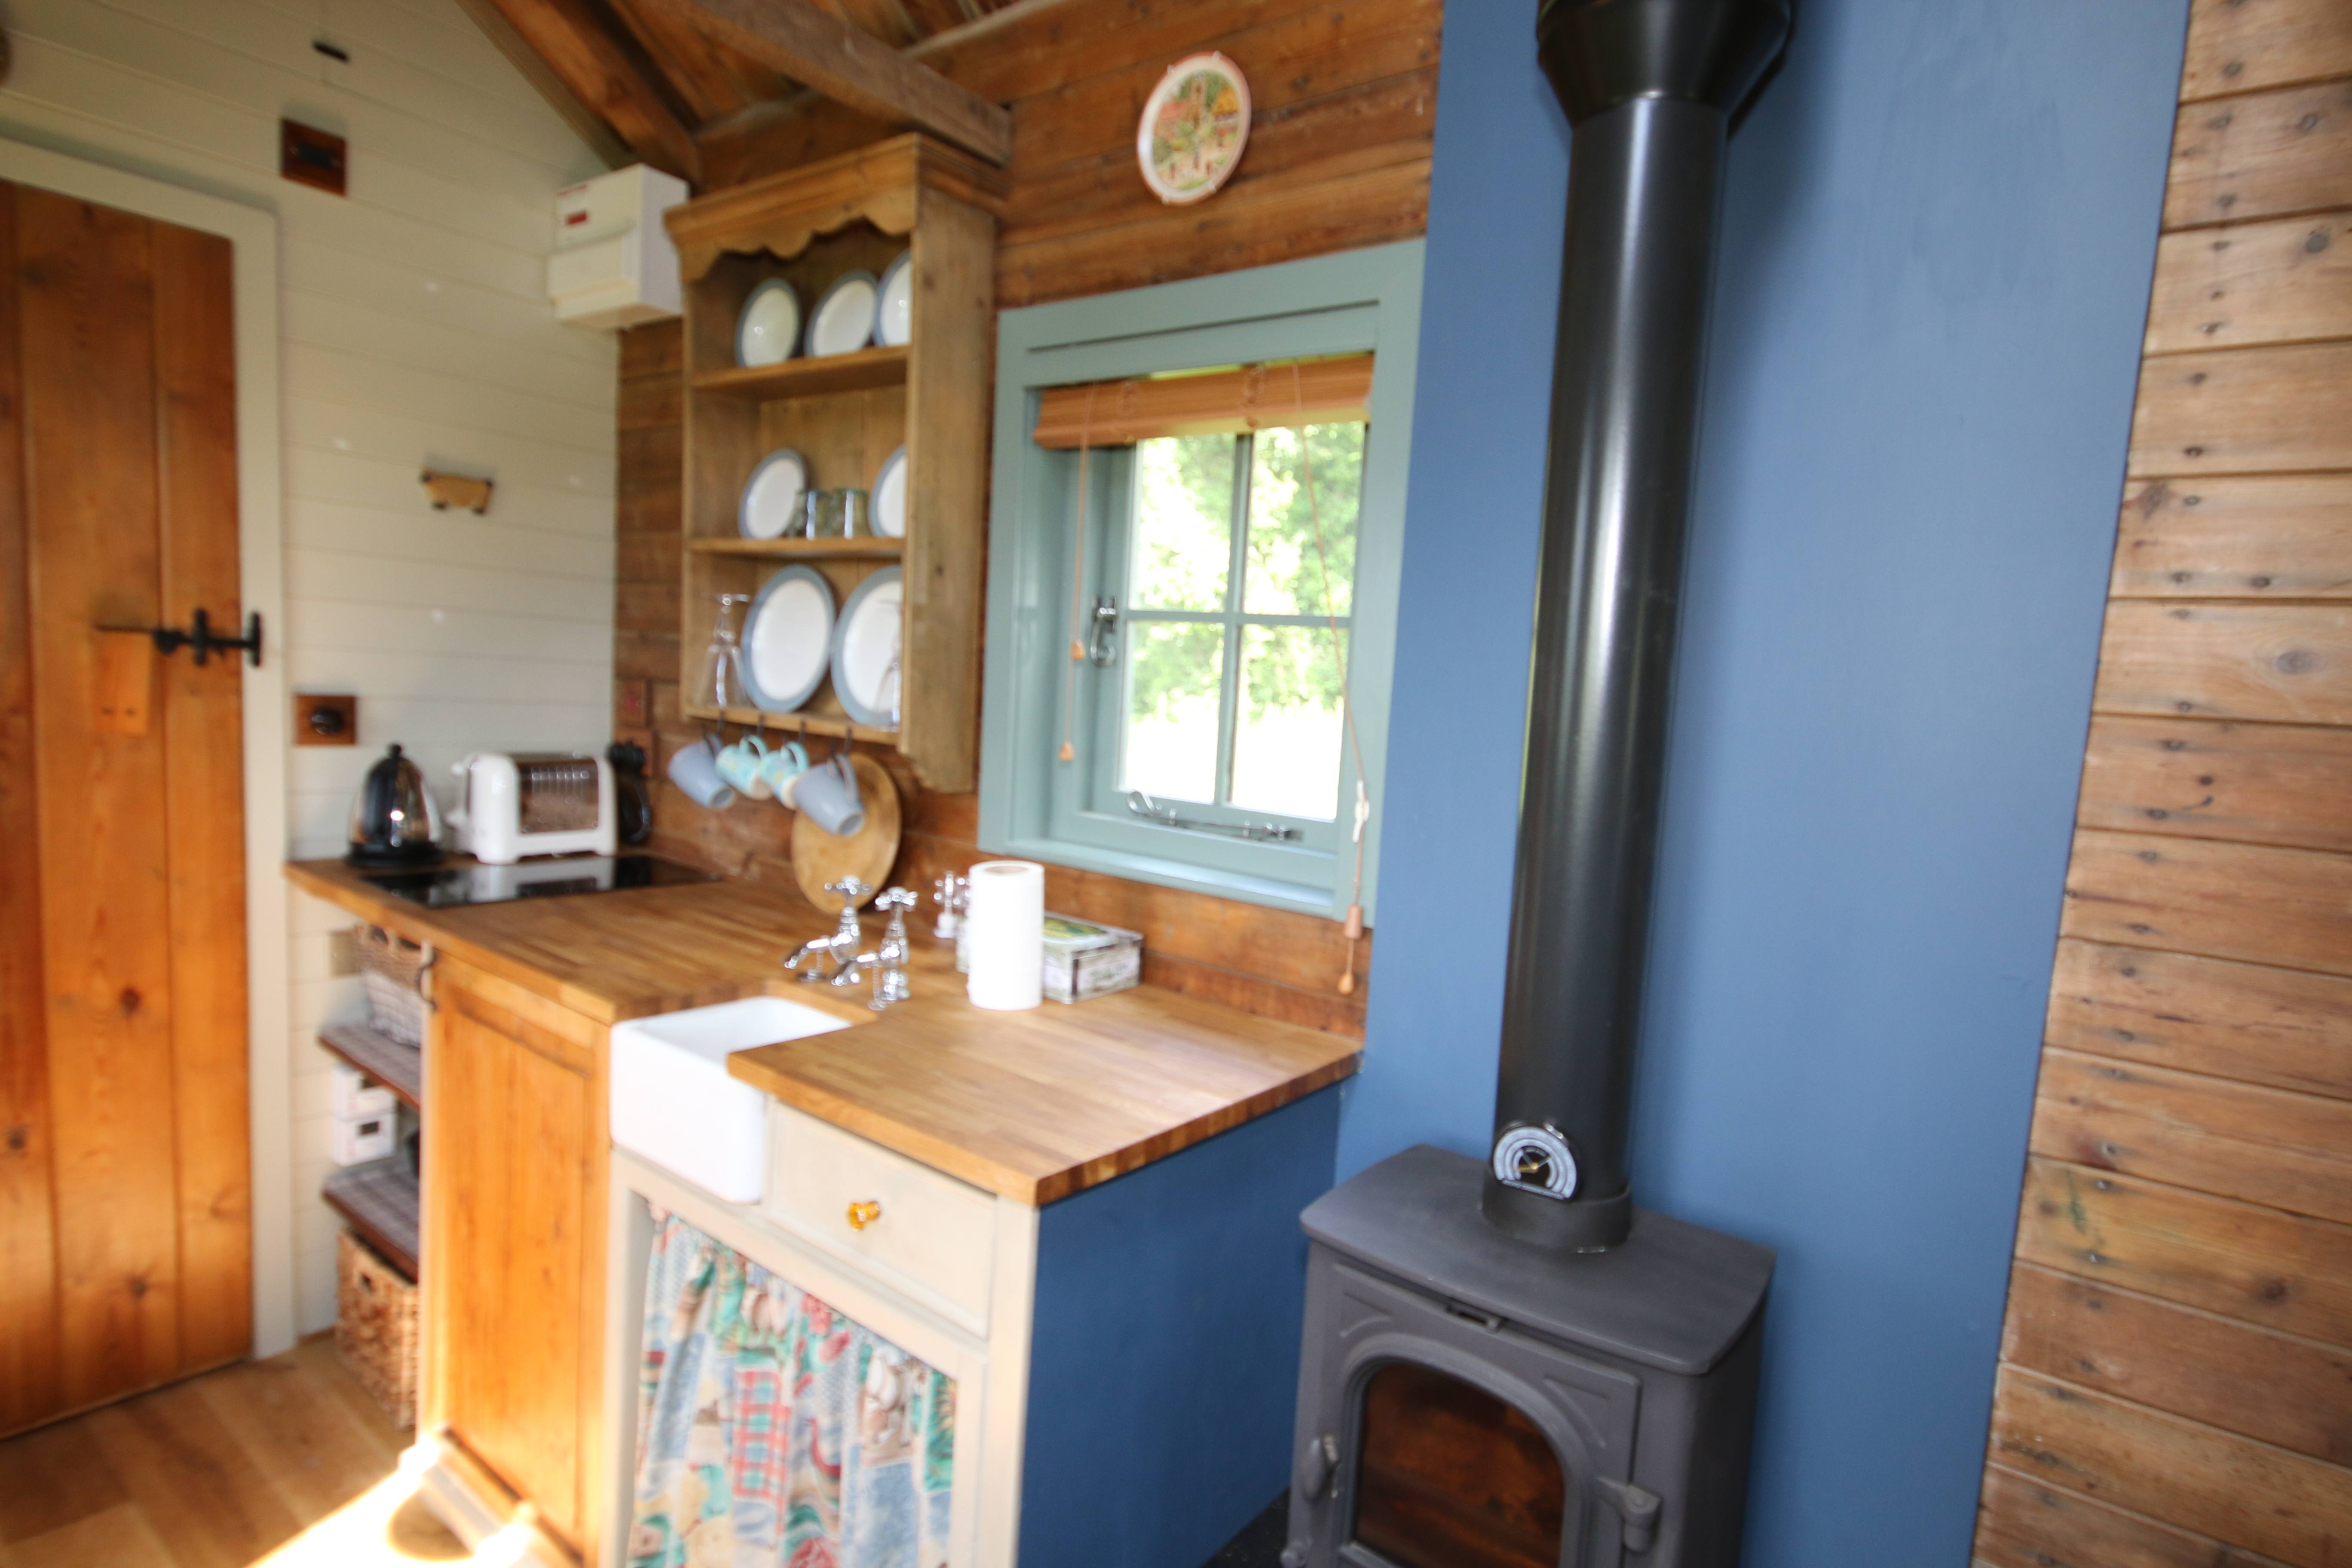 Kitchen area and woodstove at our Shepherds hut |Greenhill Glamping